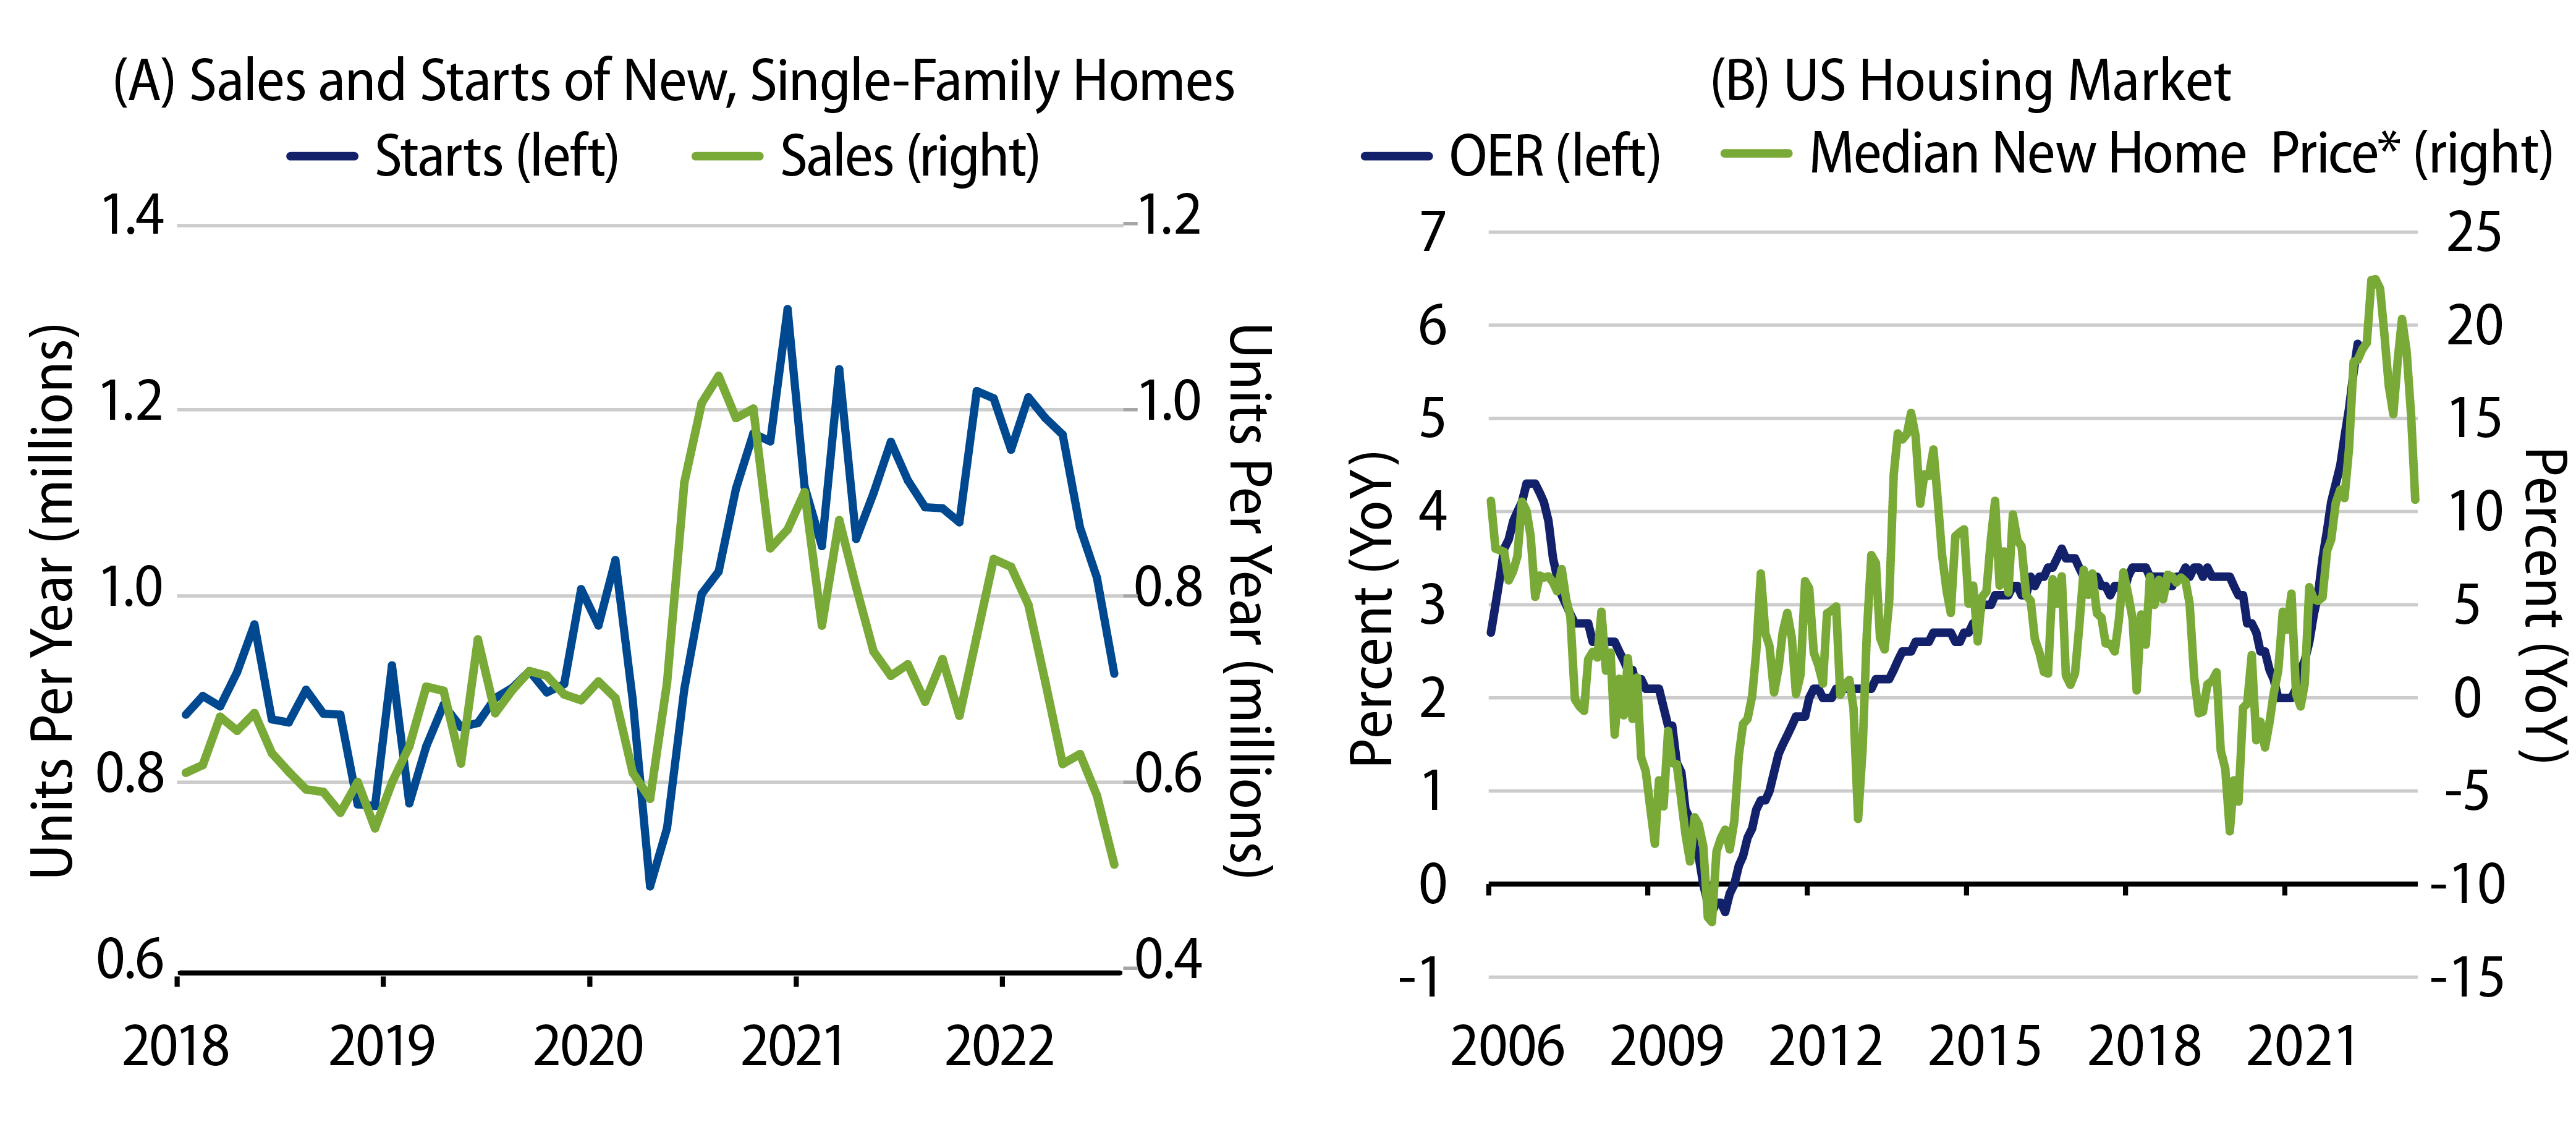 Housing Activity and Prices Deteriorate